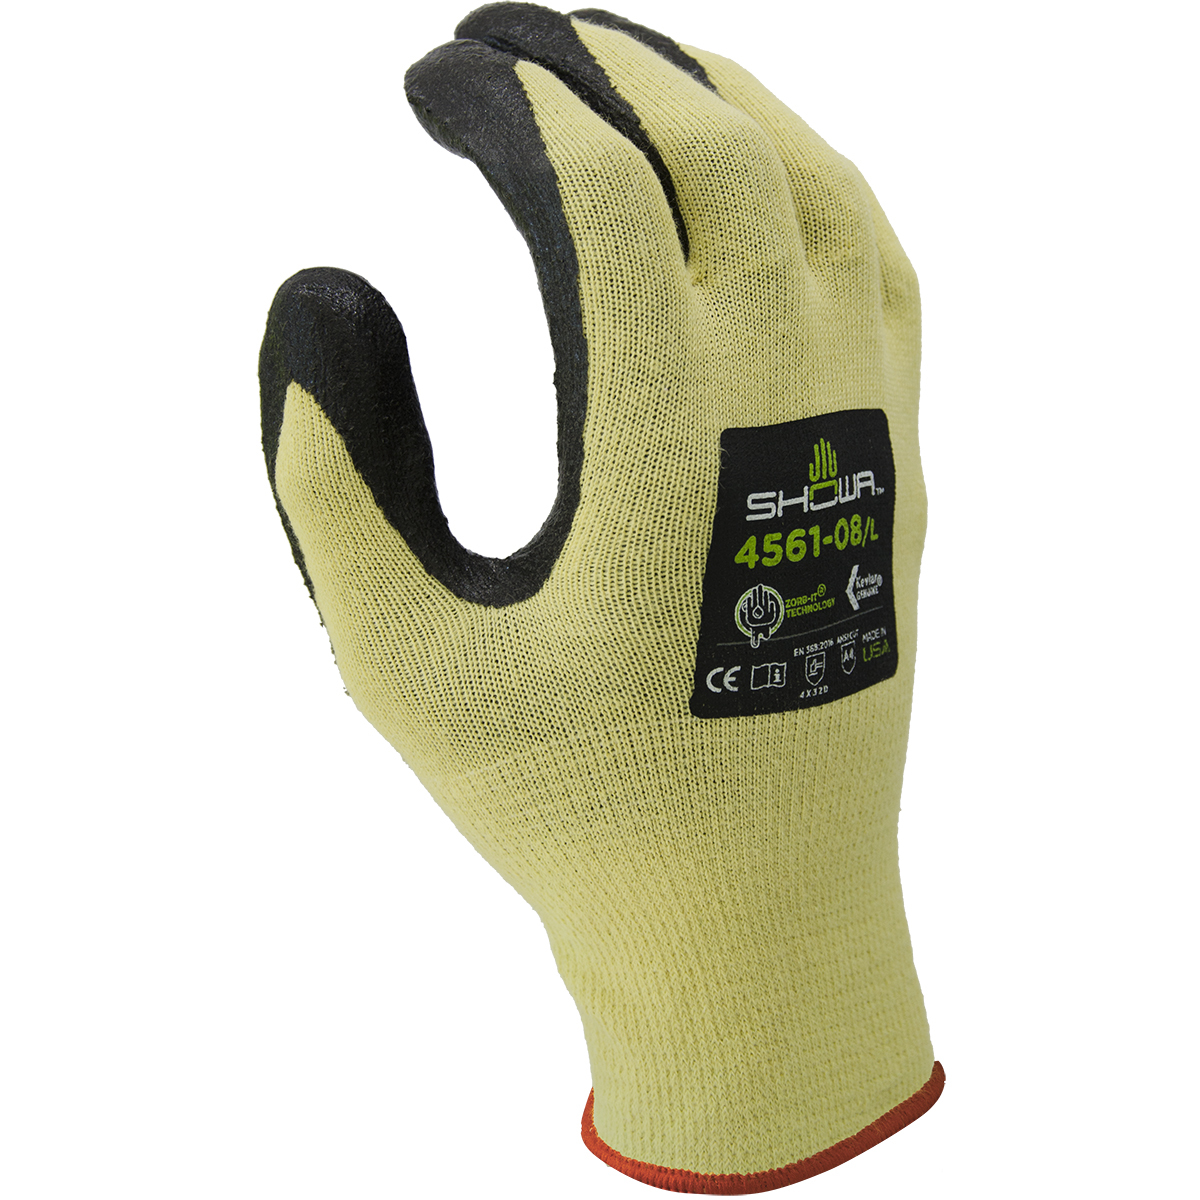 SHOWA® 4561 15 Gauge DuPont®Kevlar® Seamless Knit Cut Resistant Gloves With Zorb-IT® Foam Nitrile Coated Palm